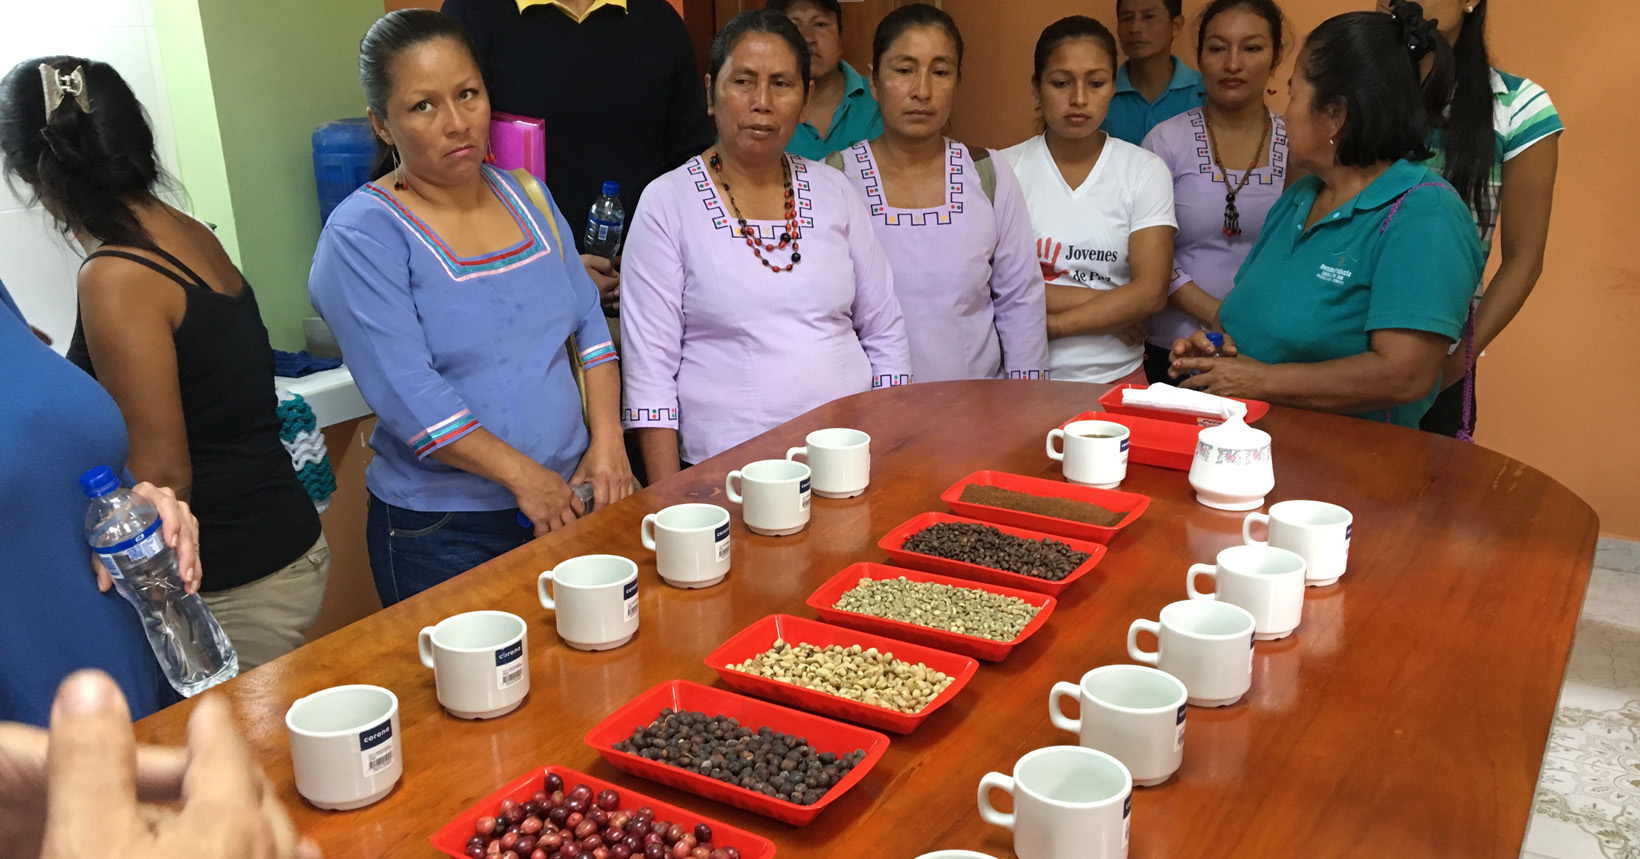 Coffee tasting with the group from Coffeelands. In the center of the table are the steps of coffee production: ripe cherries off the trees, dried cherries, hulled beans, dried and fermented beans, roasted, and finally ground coffee.